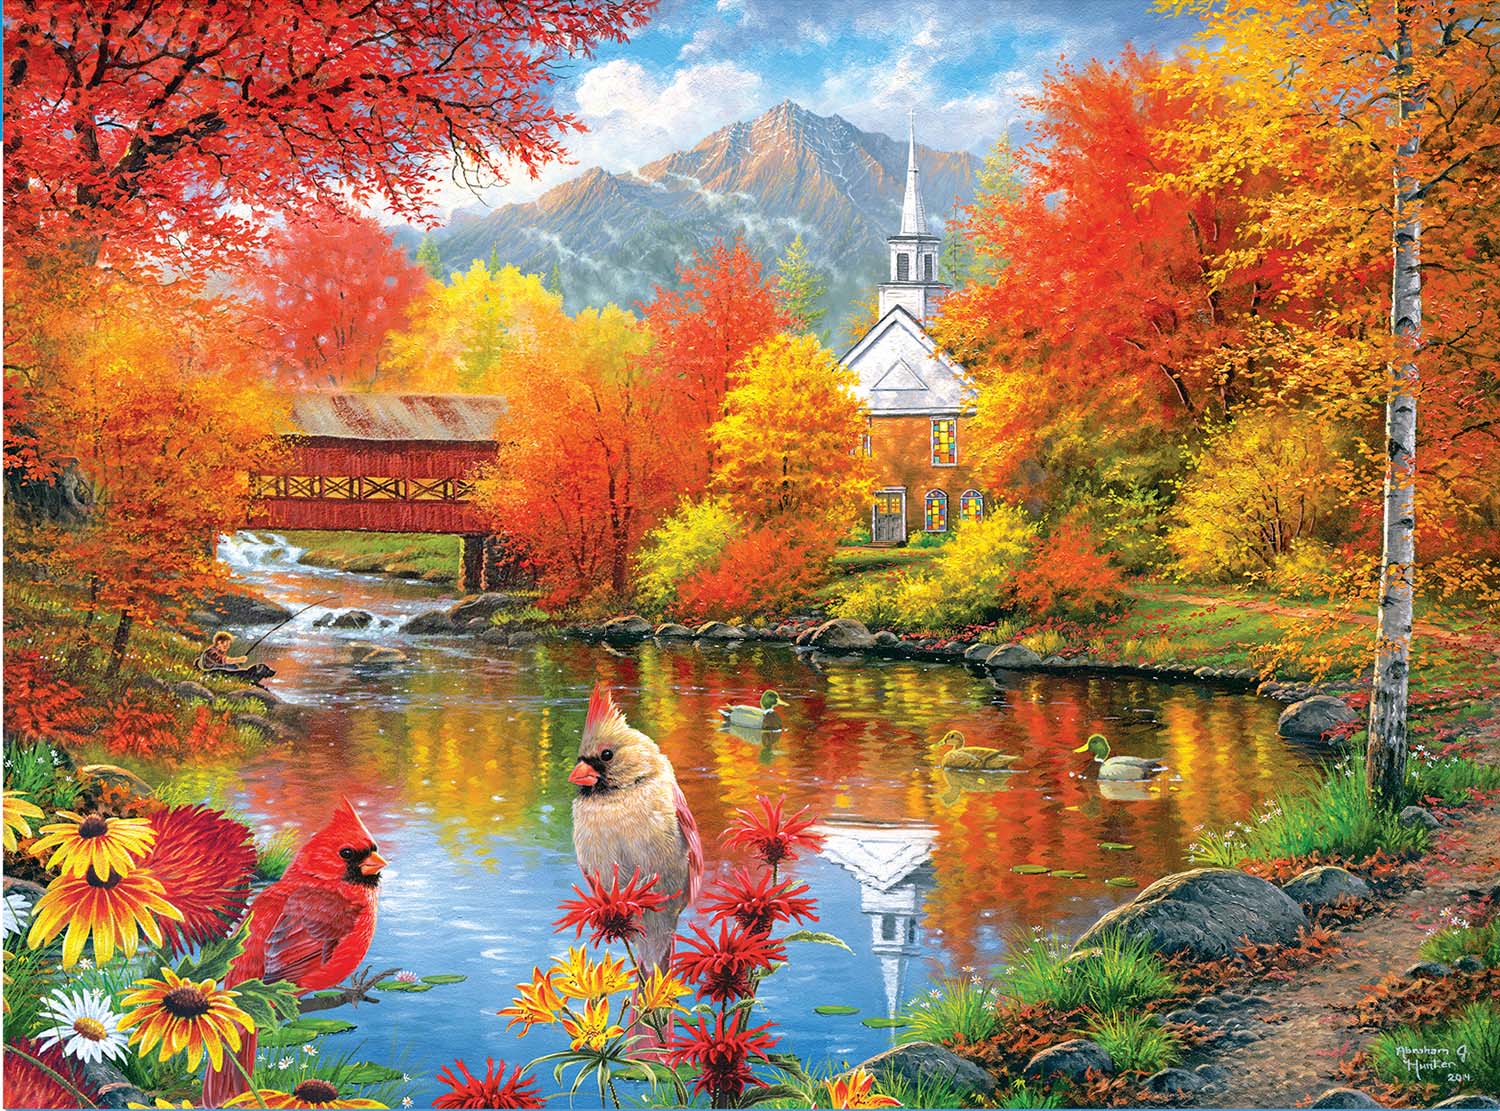 Autumn Tranquility, 1000 Pieces, RoseArt | Puzzle Warehouse